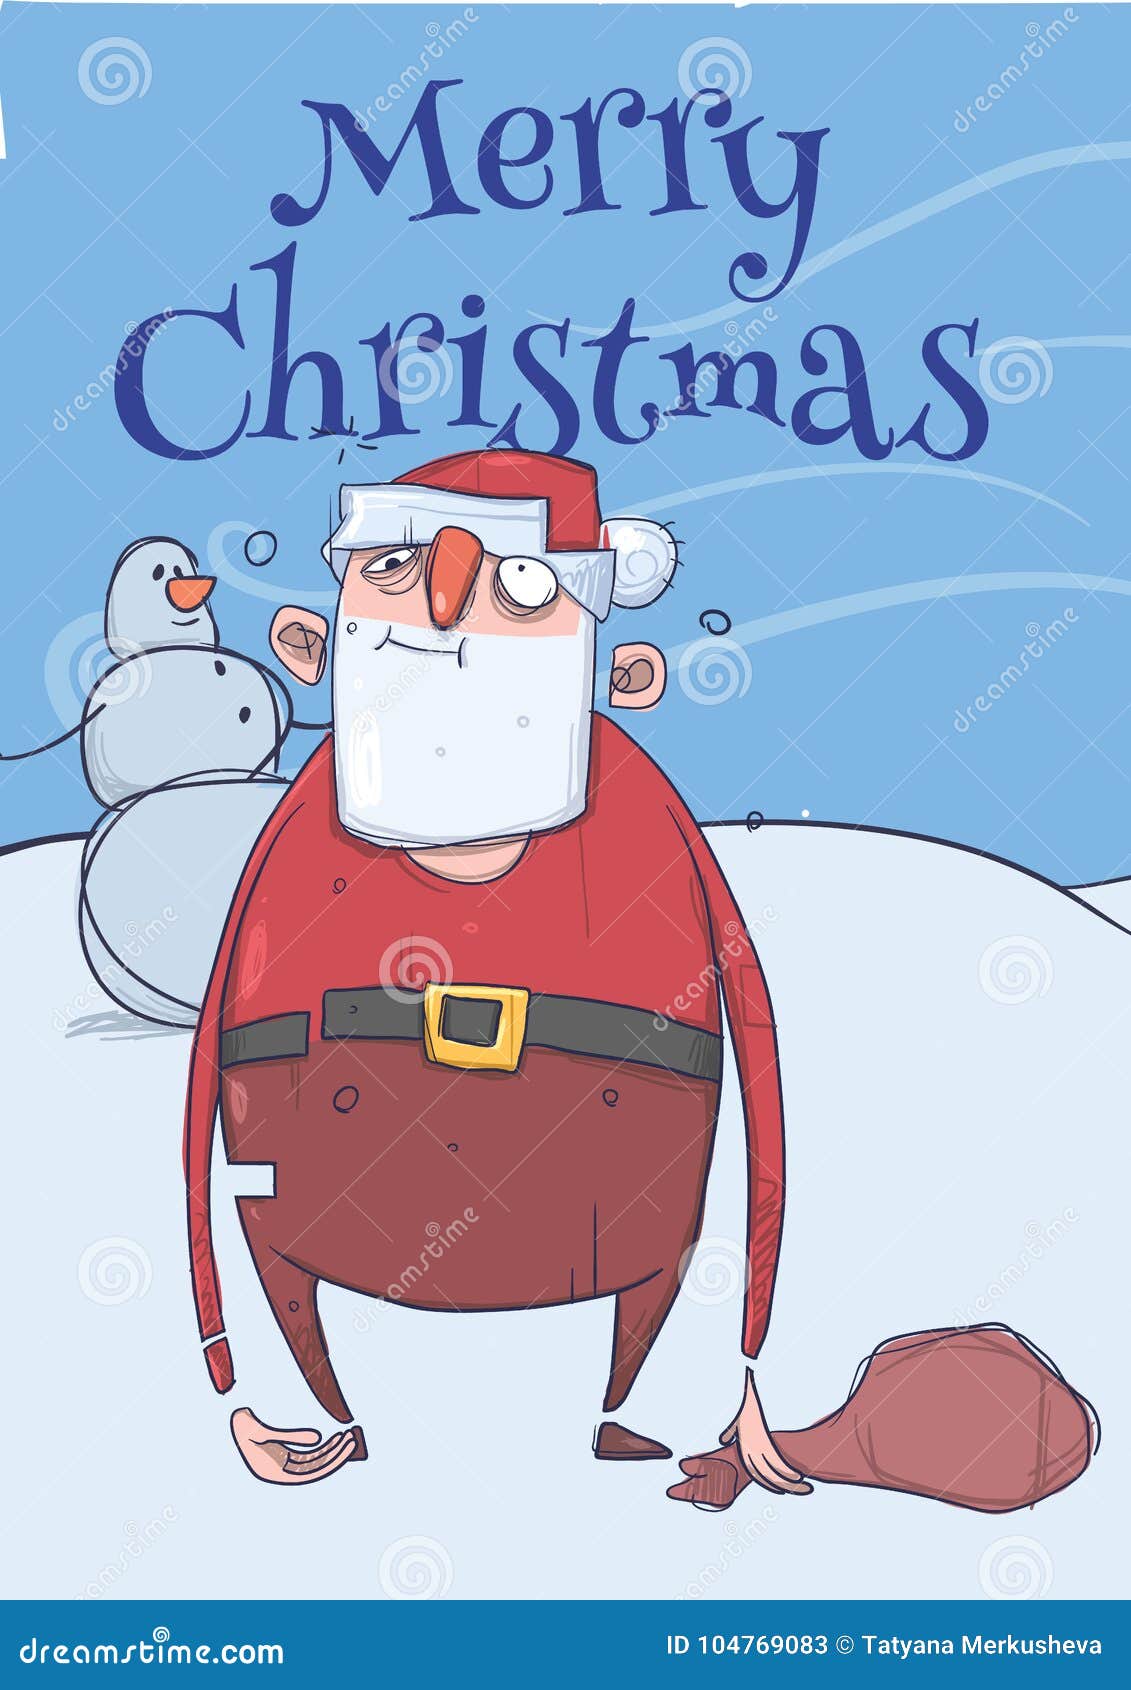 Christmas Card of Funny Drunk Santa Claus with a Bag Standing Next To  Snowman in Frosty Windy Weather. Wasted Happy Stock Vector - Illustration  of christmas, presents: 104769083